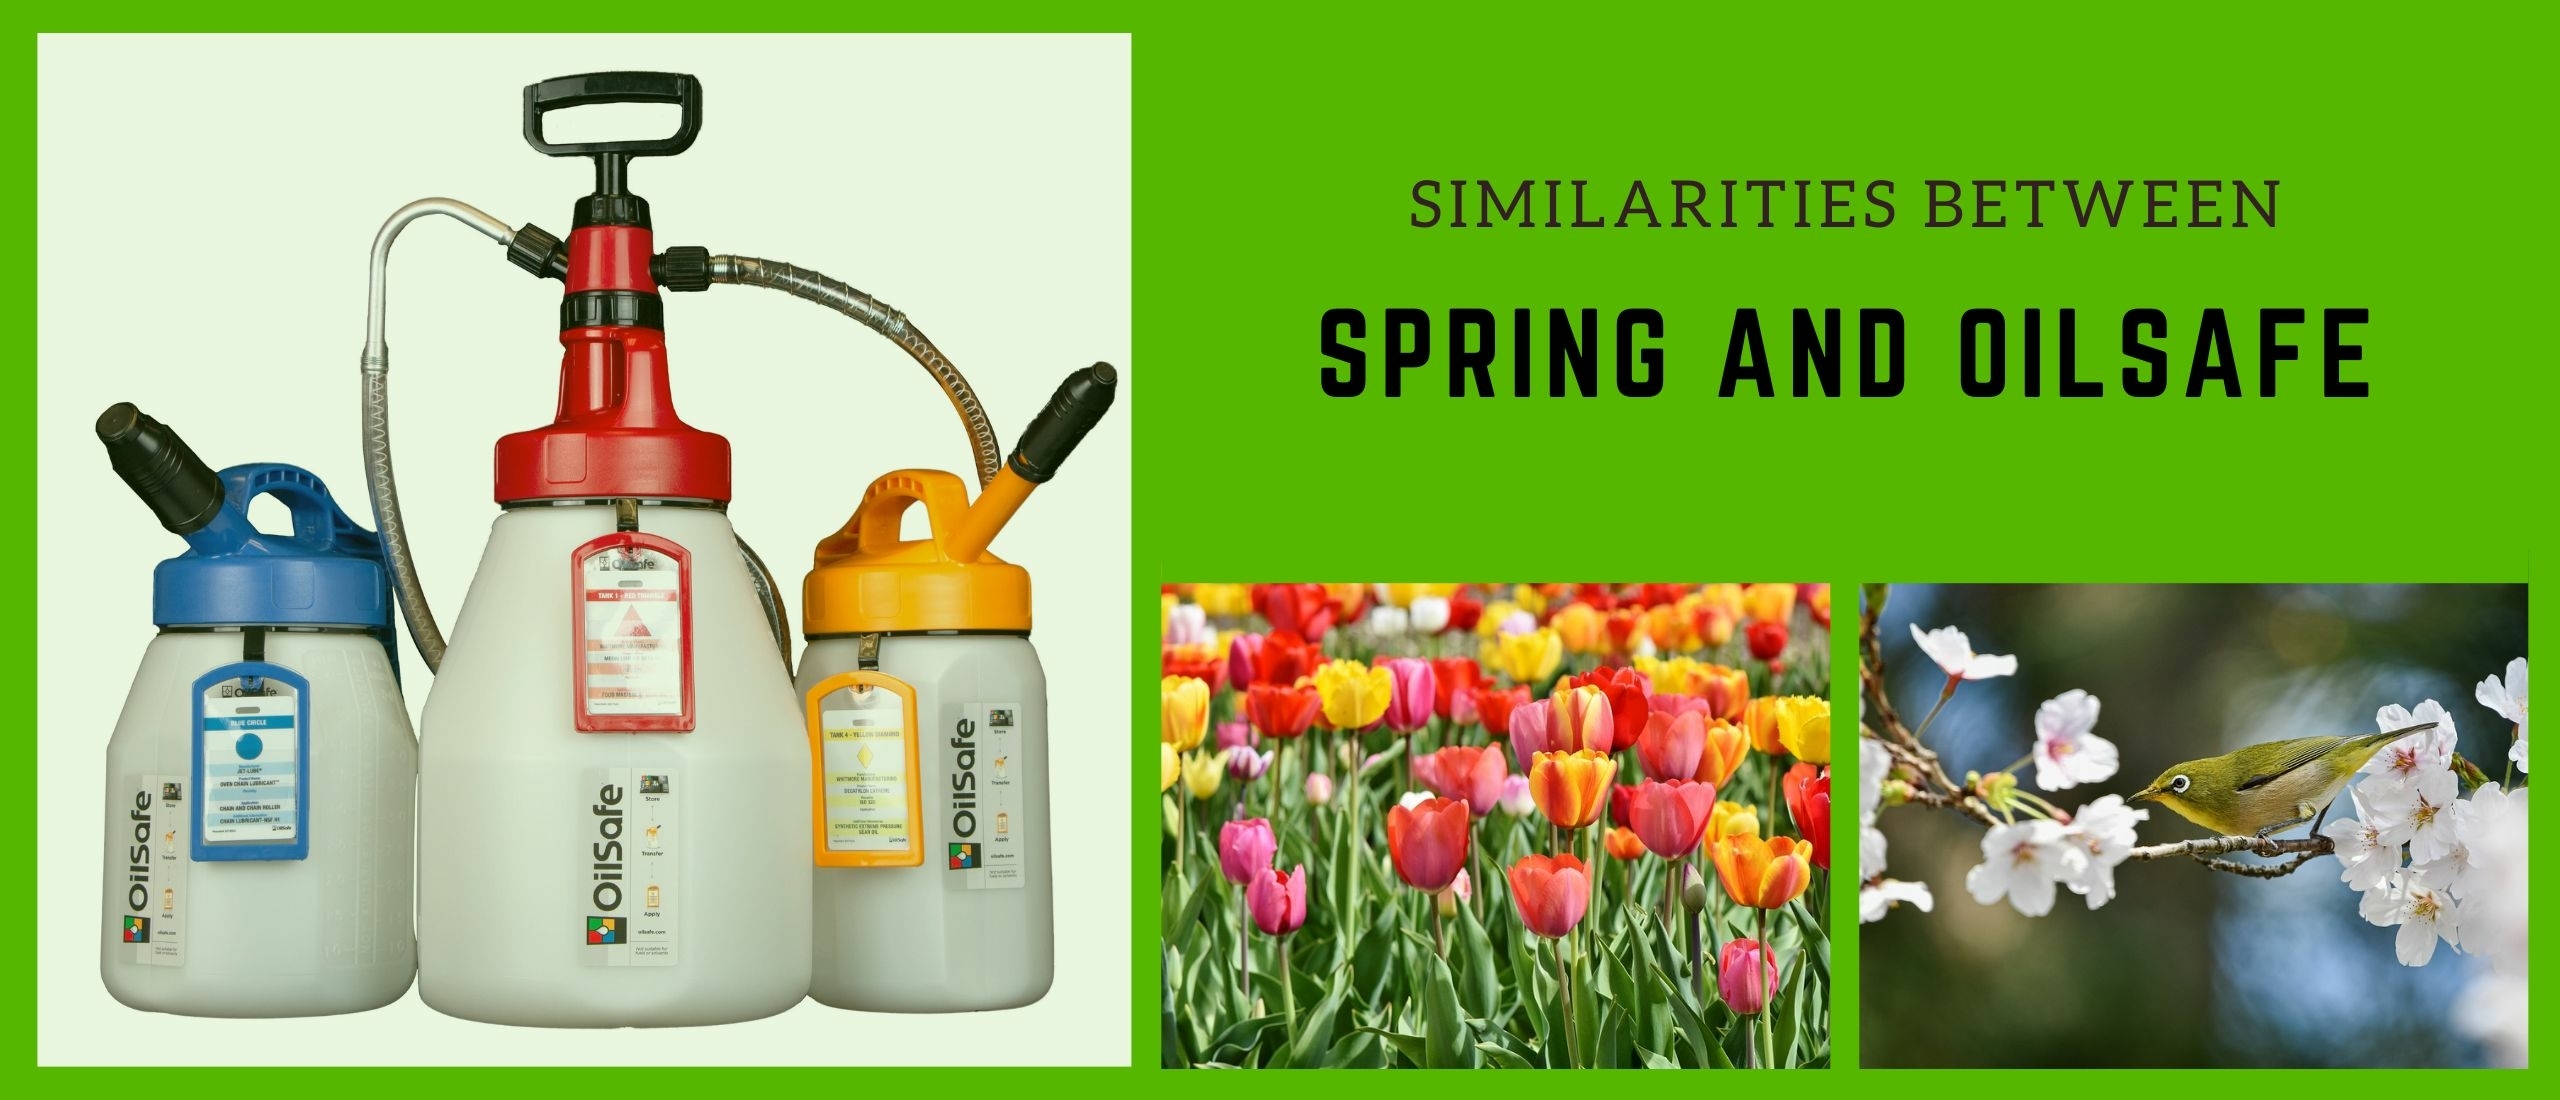 Similarities between Spring and OilSafe